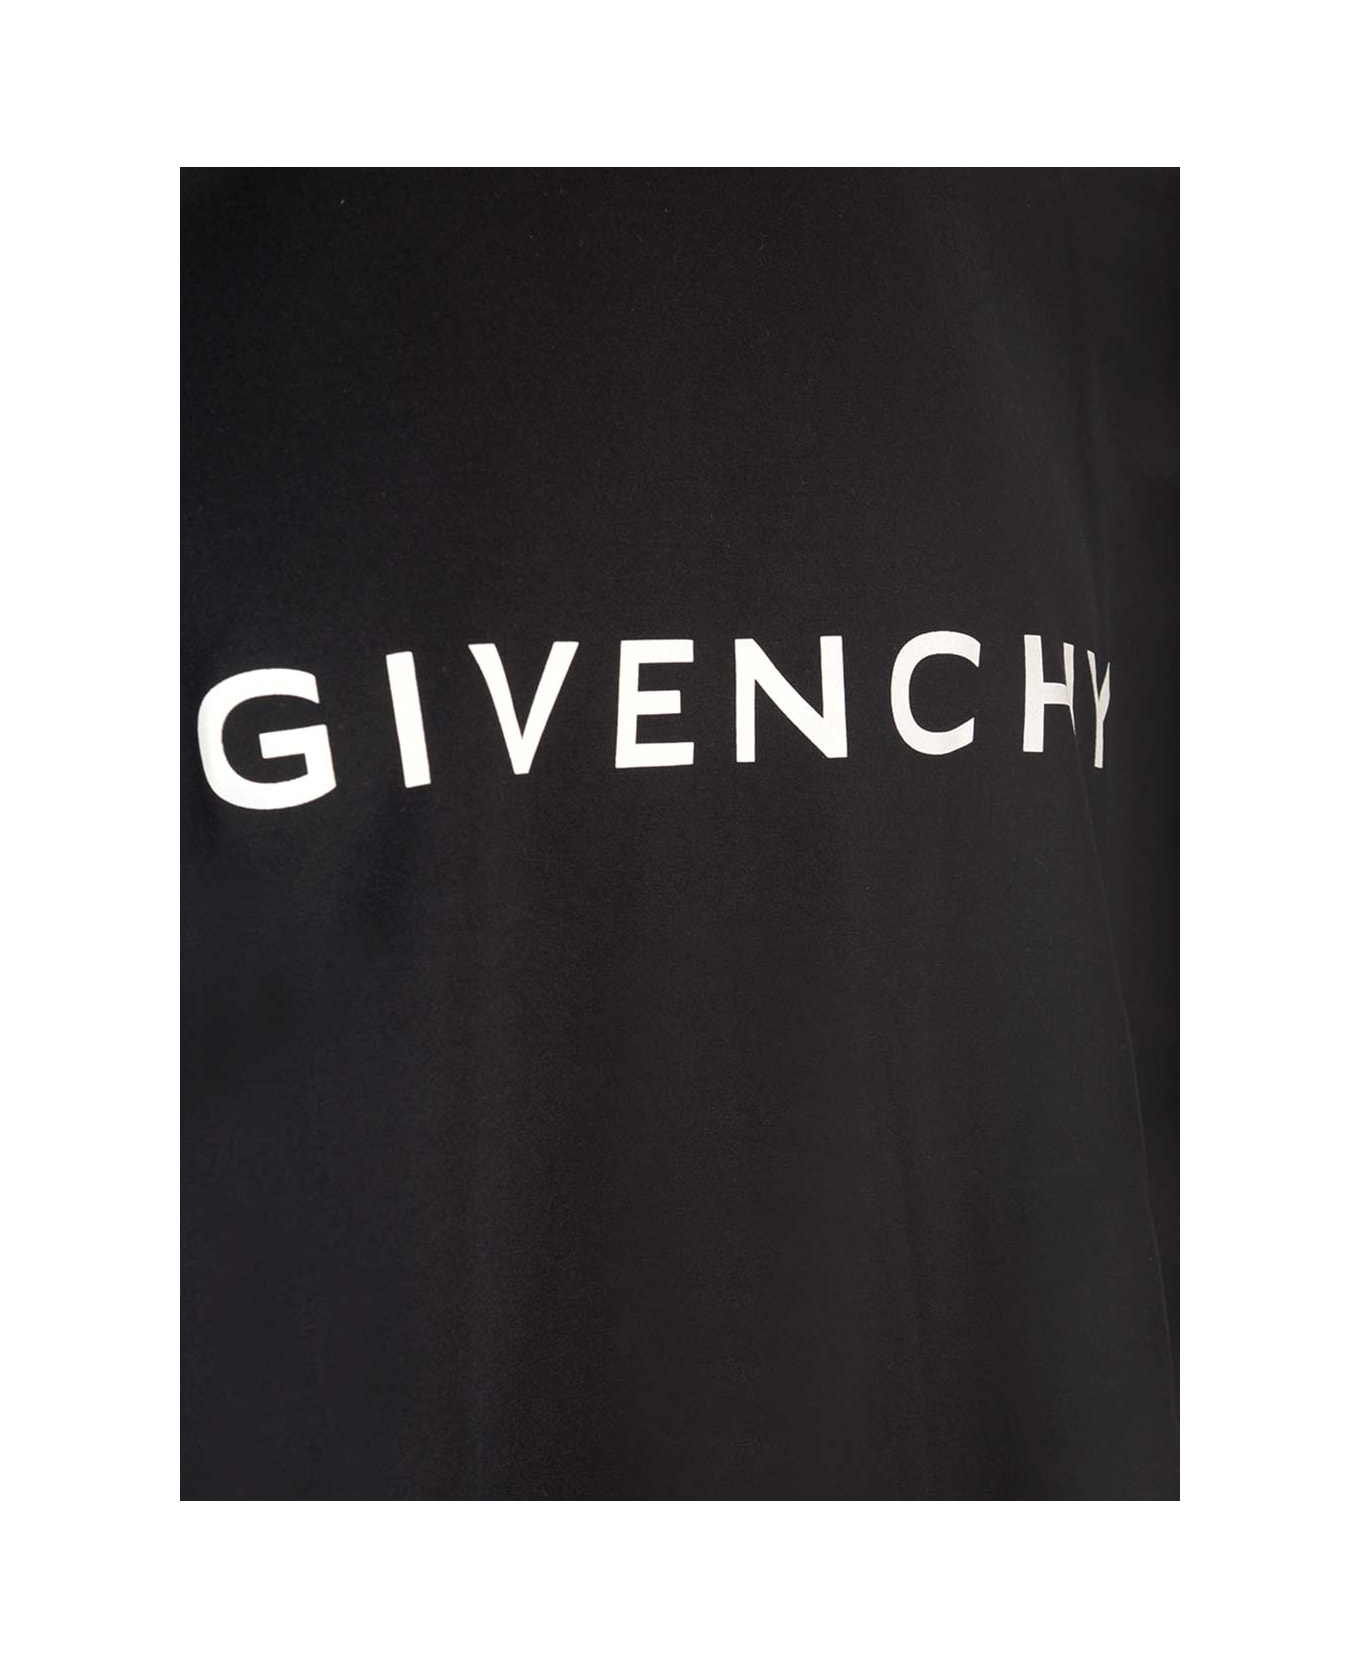 Givenchy Oversized Fit T-shirt - Black シャツ